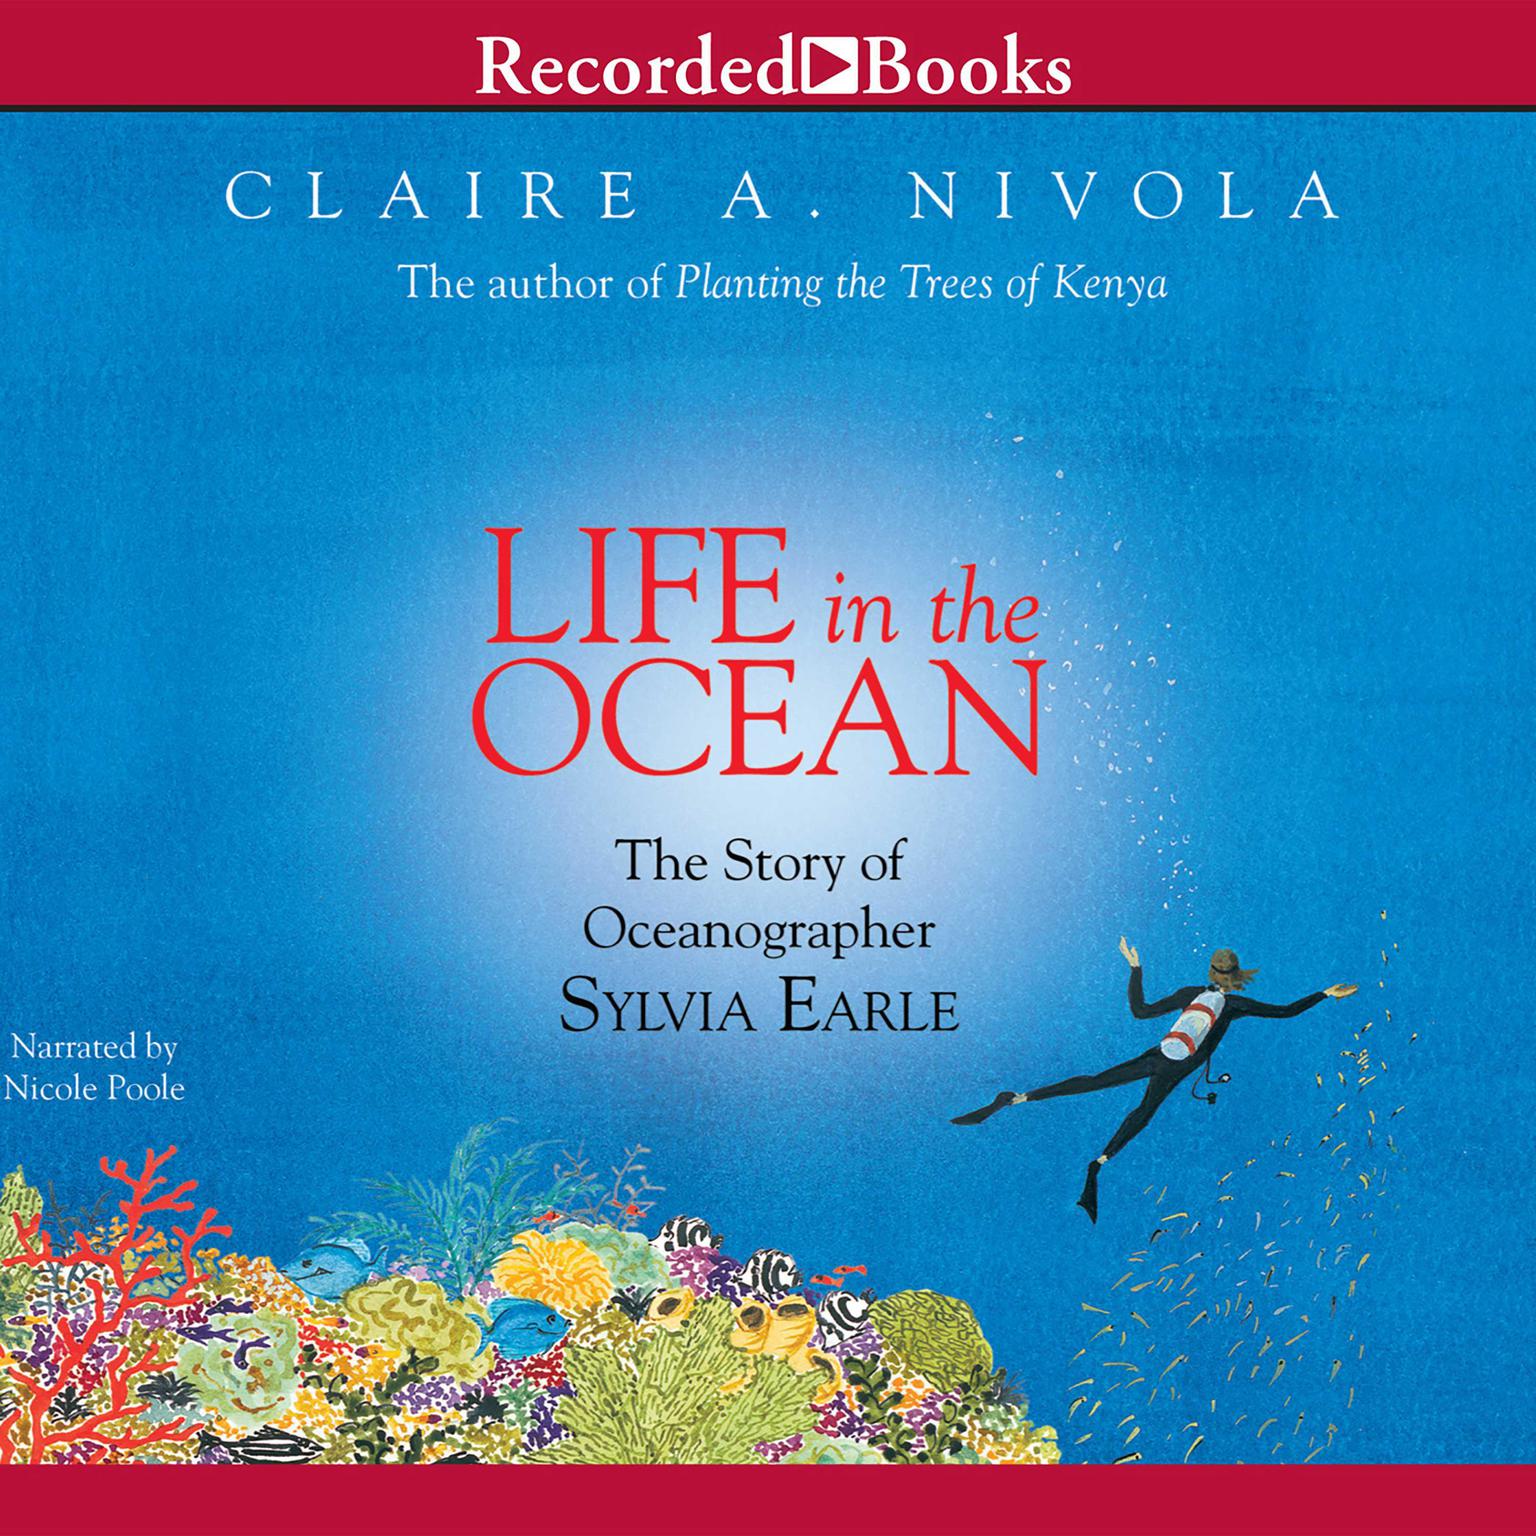 Life in the Ocean: The Story of Oceanographer Sylvia Earle Audiobook, by Claire A. Nivola